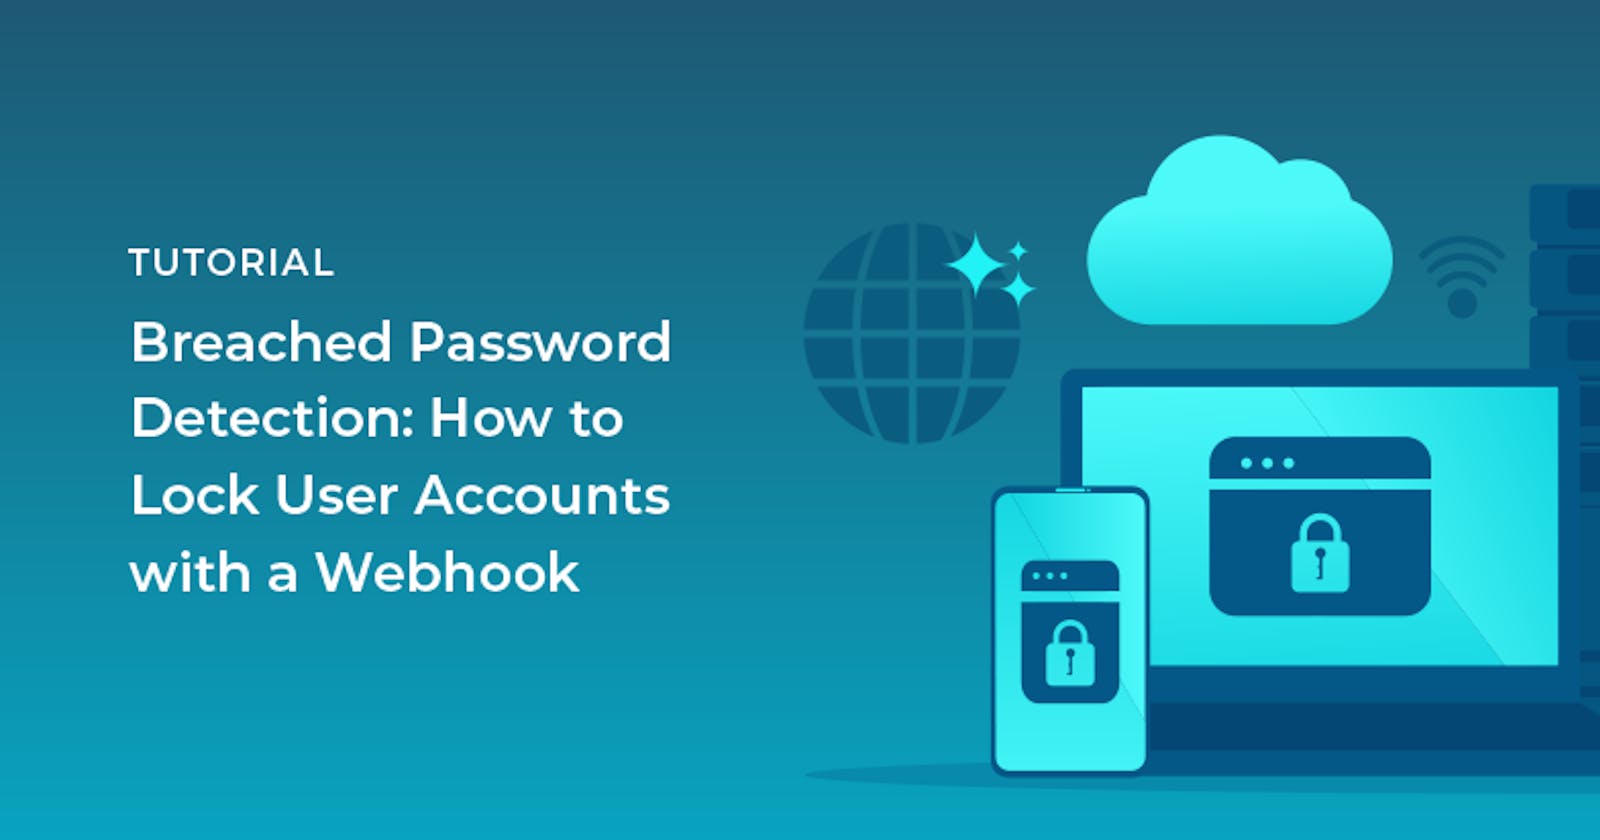 Breached Password Detection: How to Lock User Accounts with a Webhook